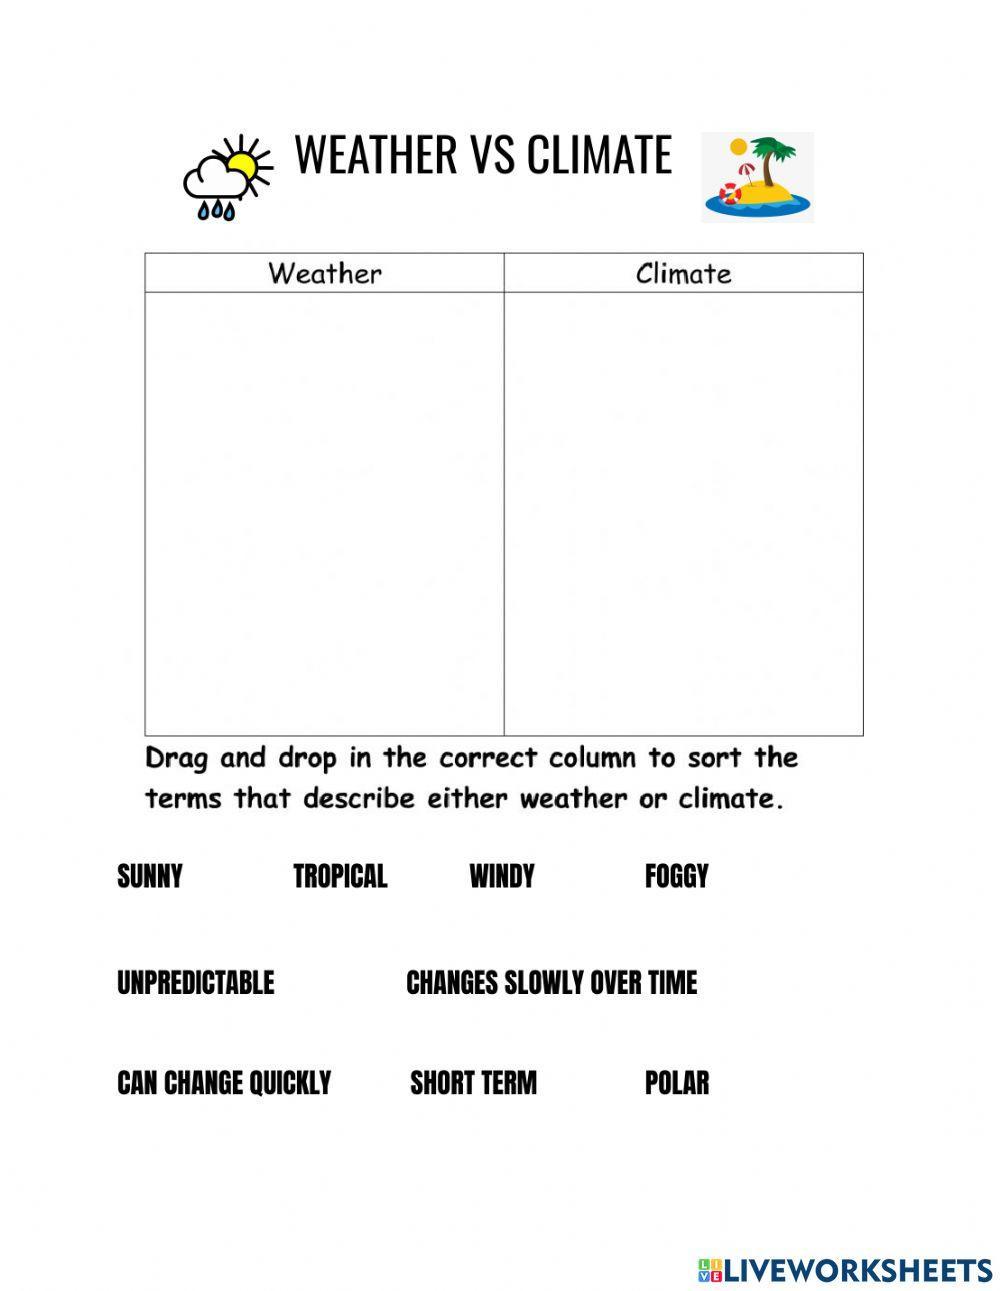 Weather vs climate